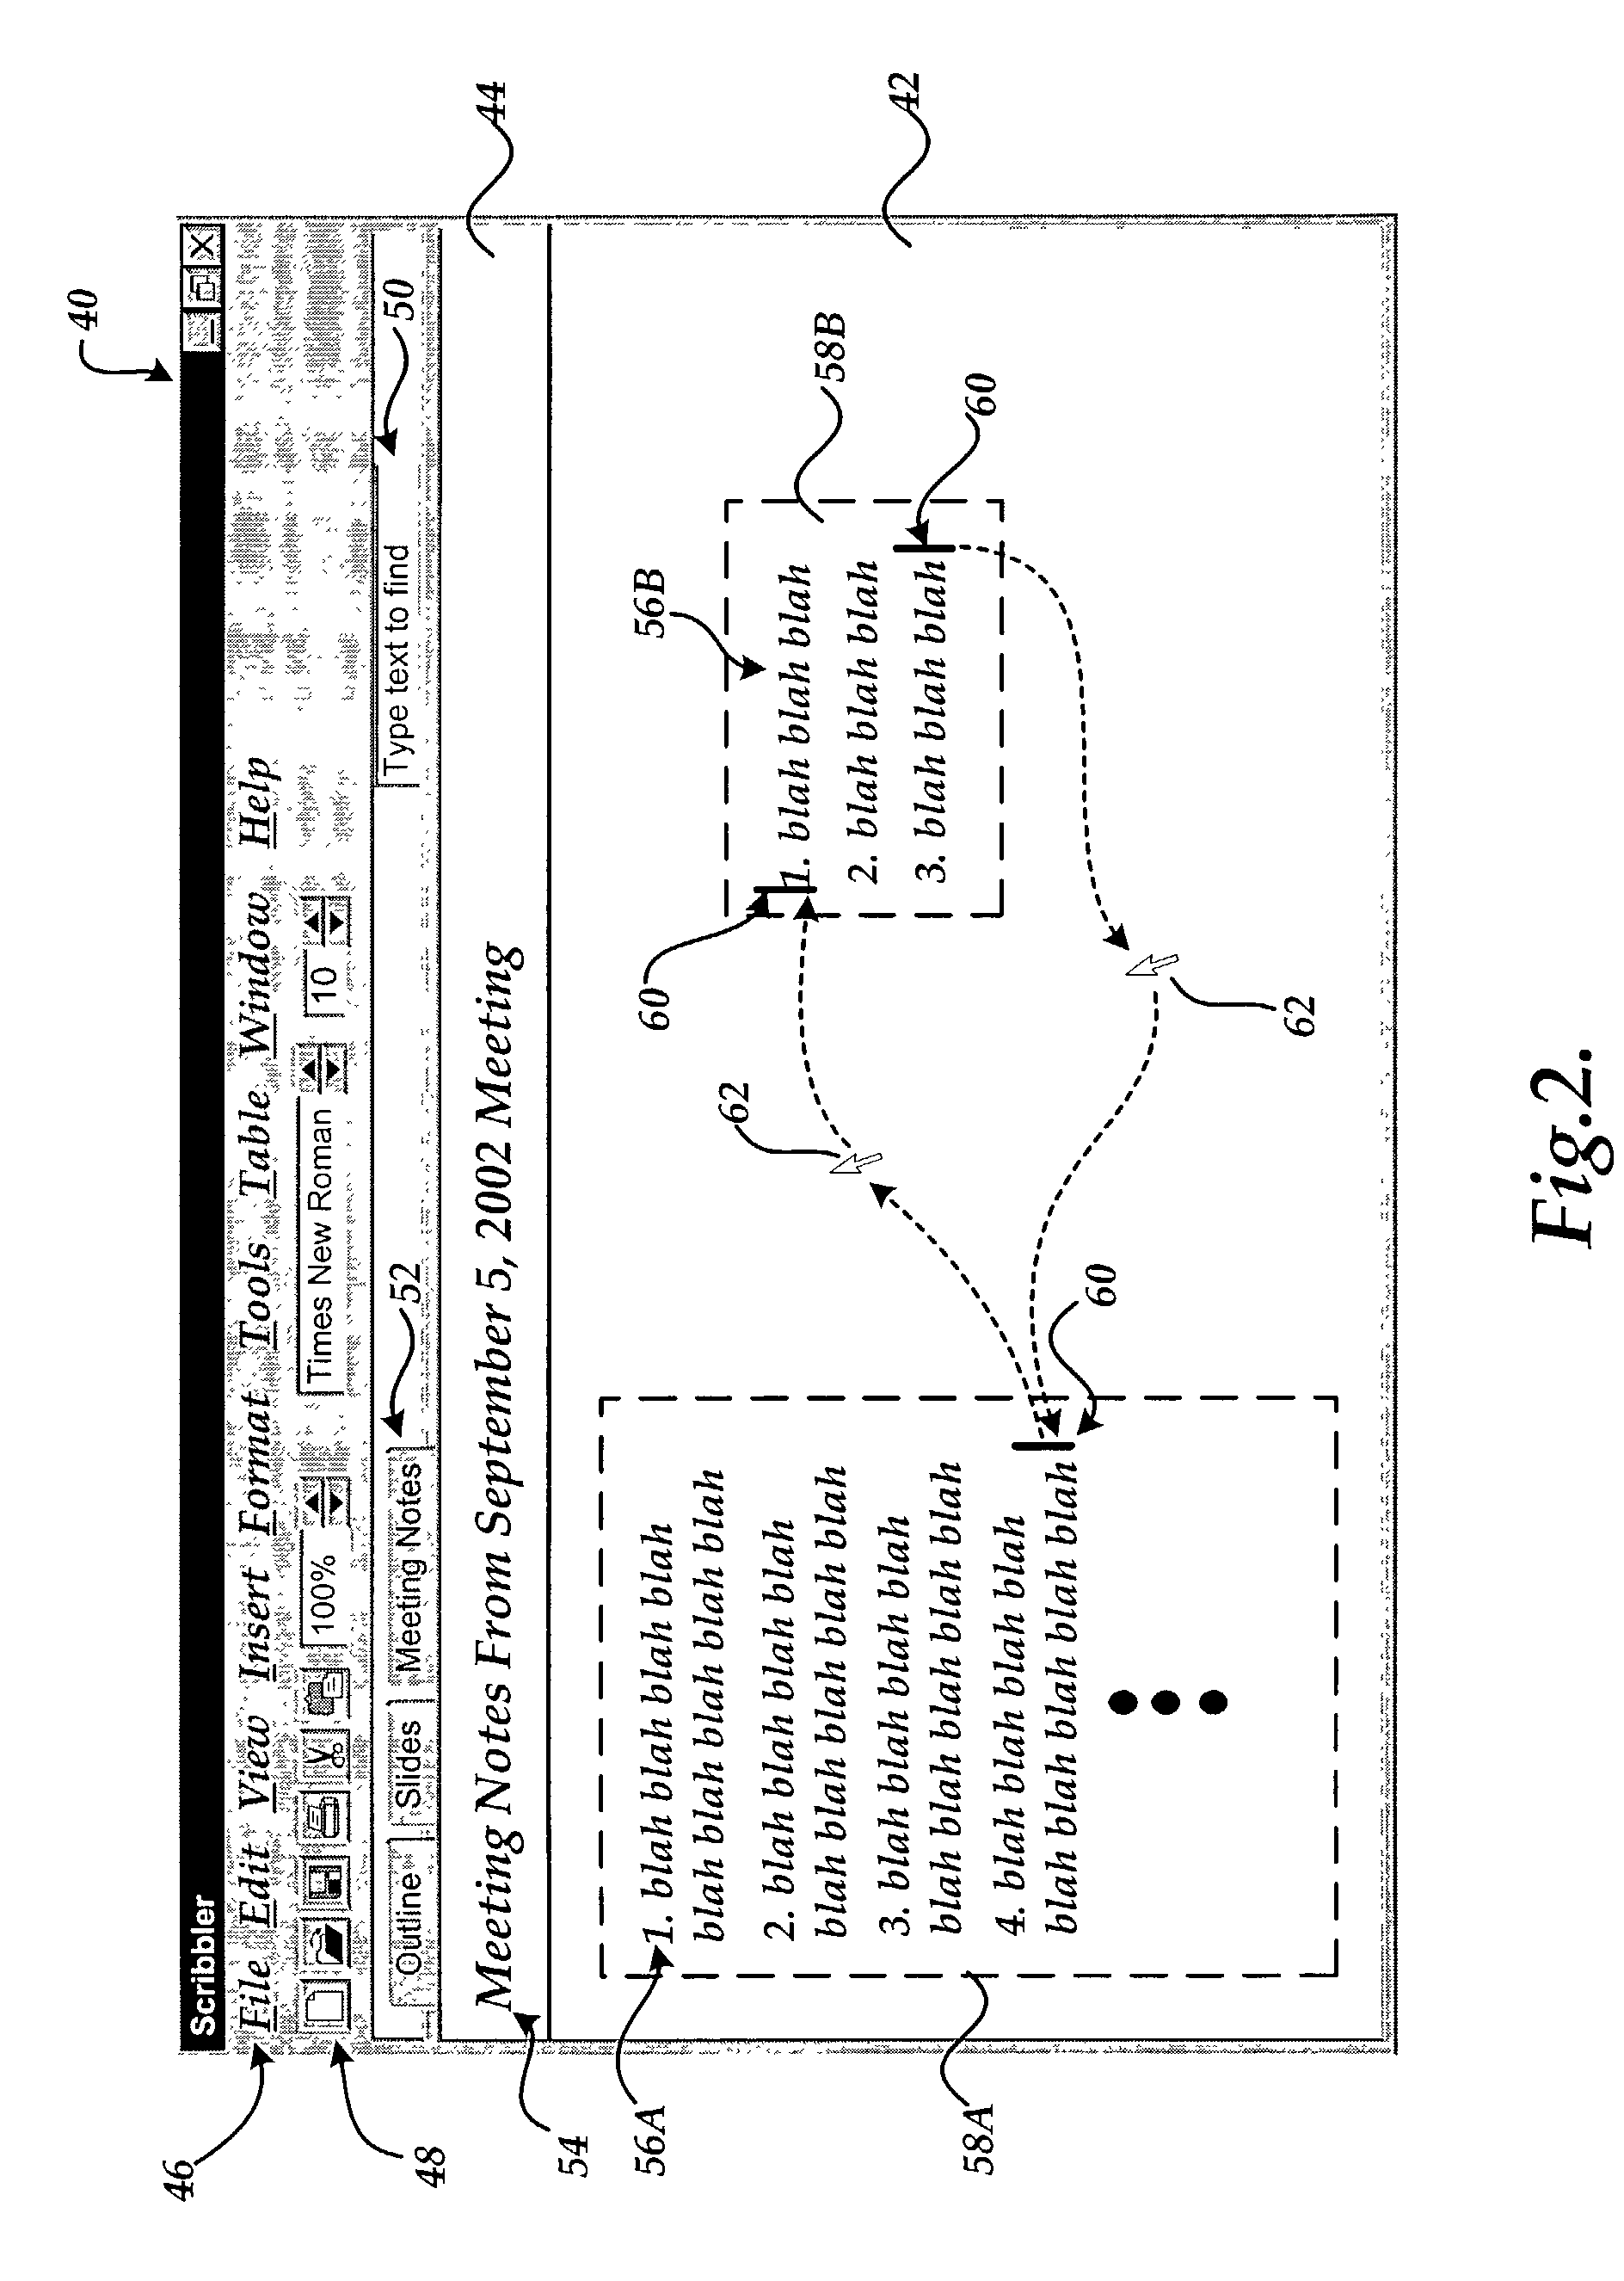 Method, apparatus, and computer-readable medium for creating asides within an electronic document